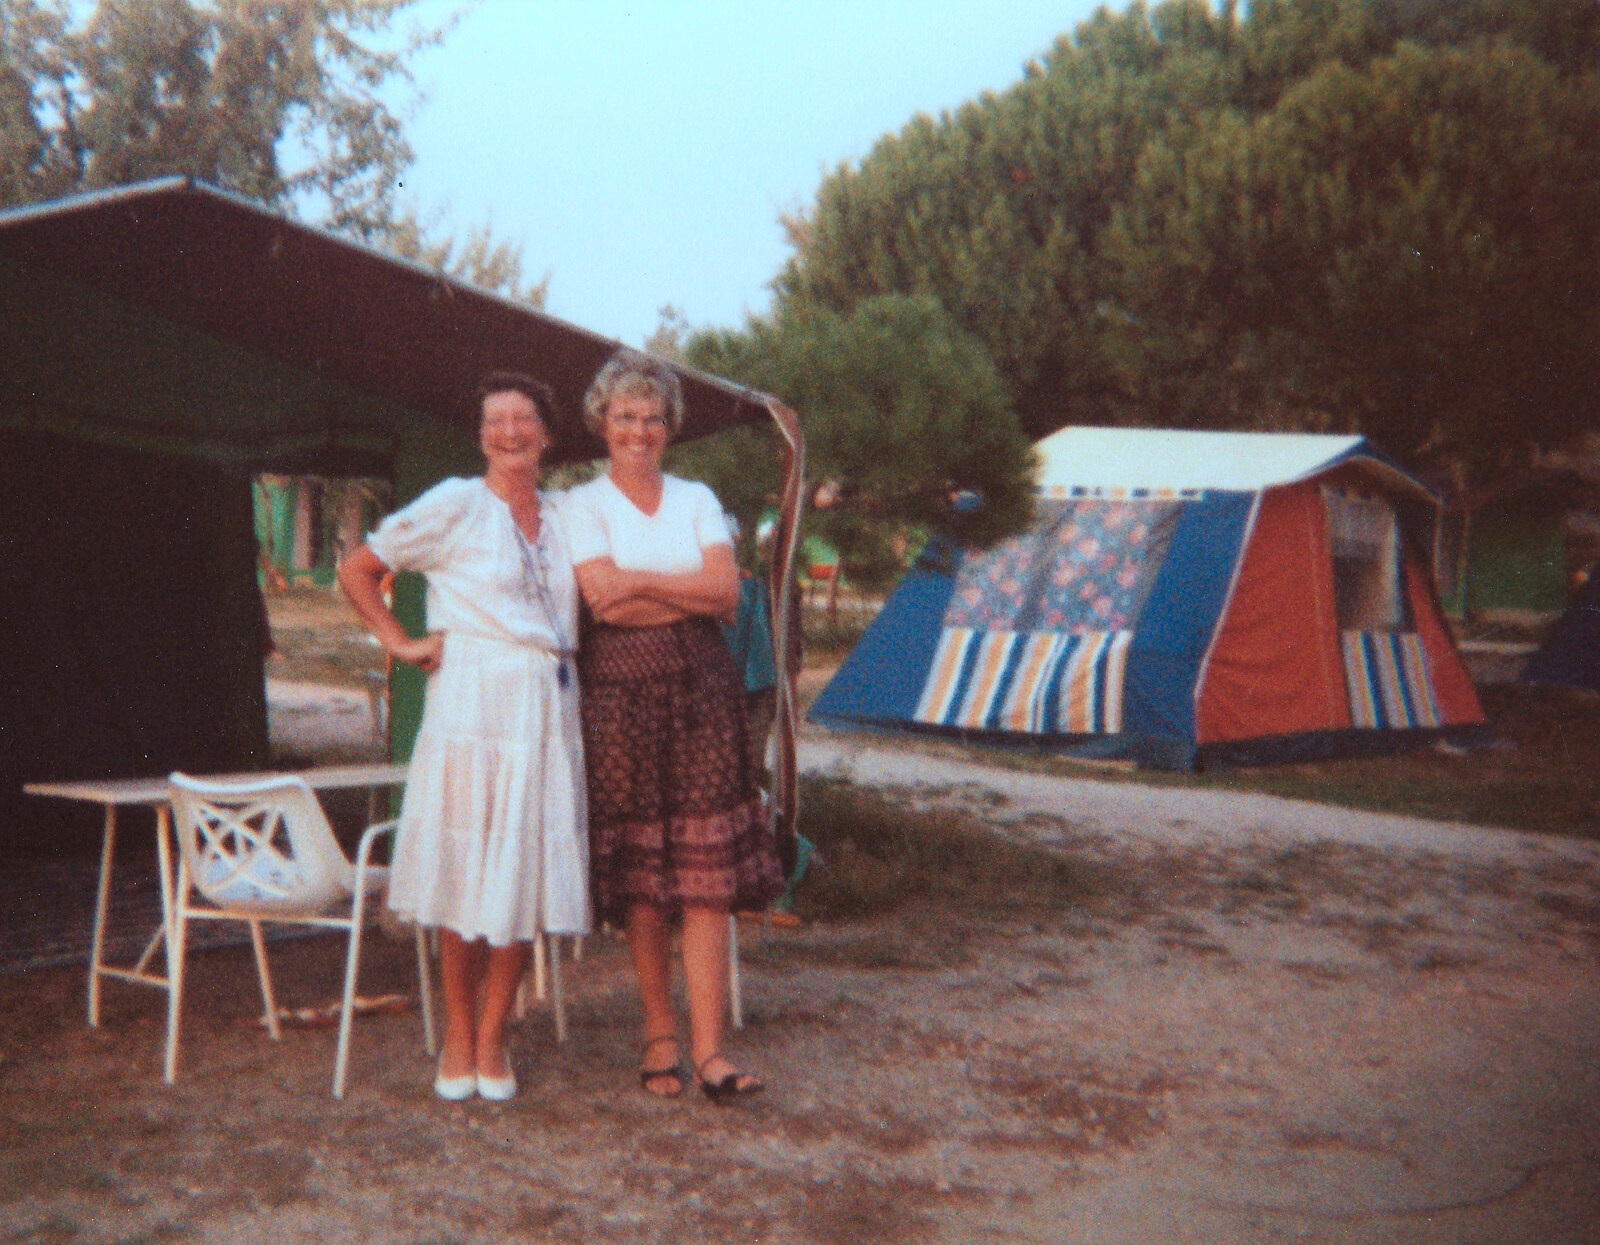 Pam and Jean outside their tent from Camping with Sean, The Camargue, South of France, 15th July 1982